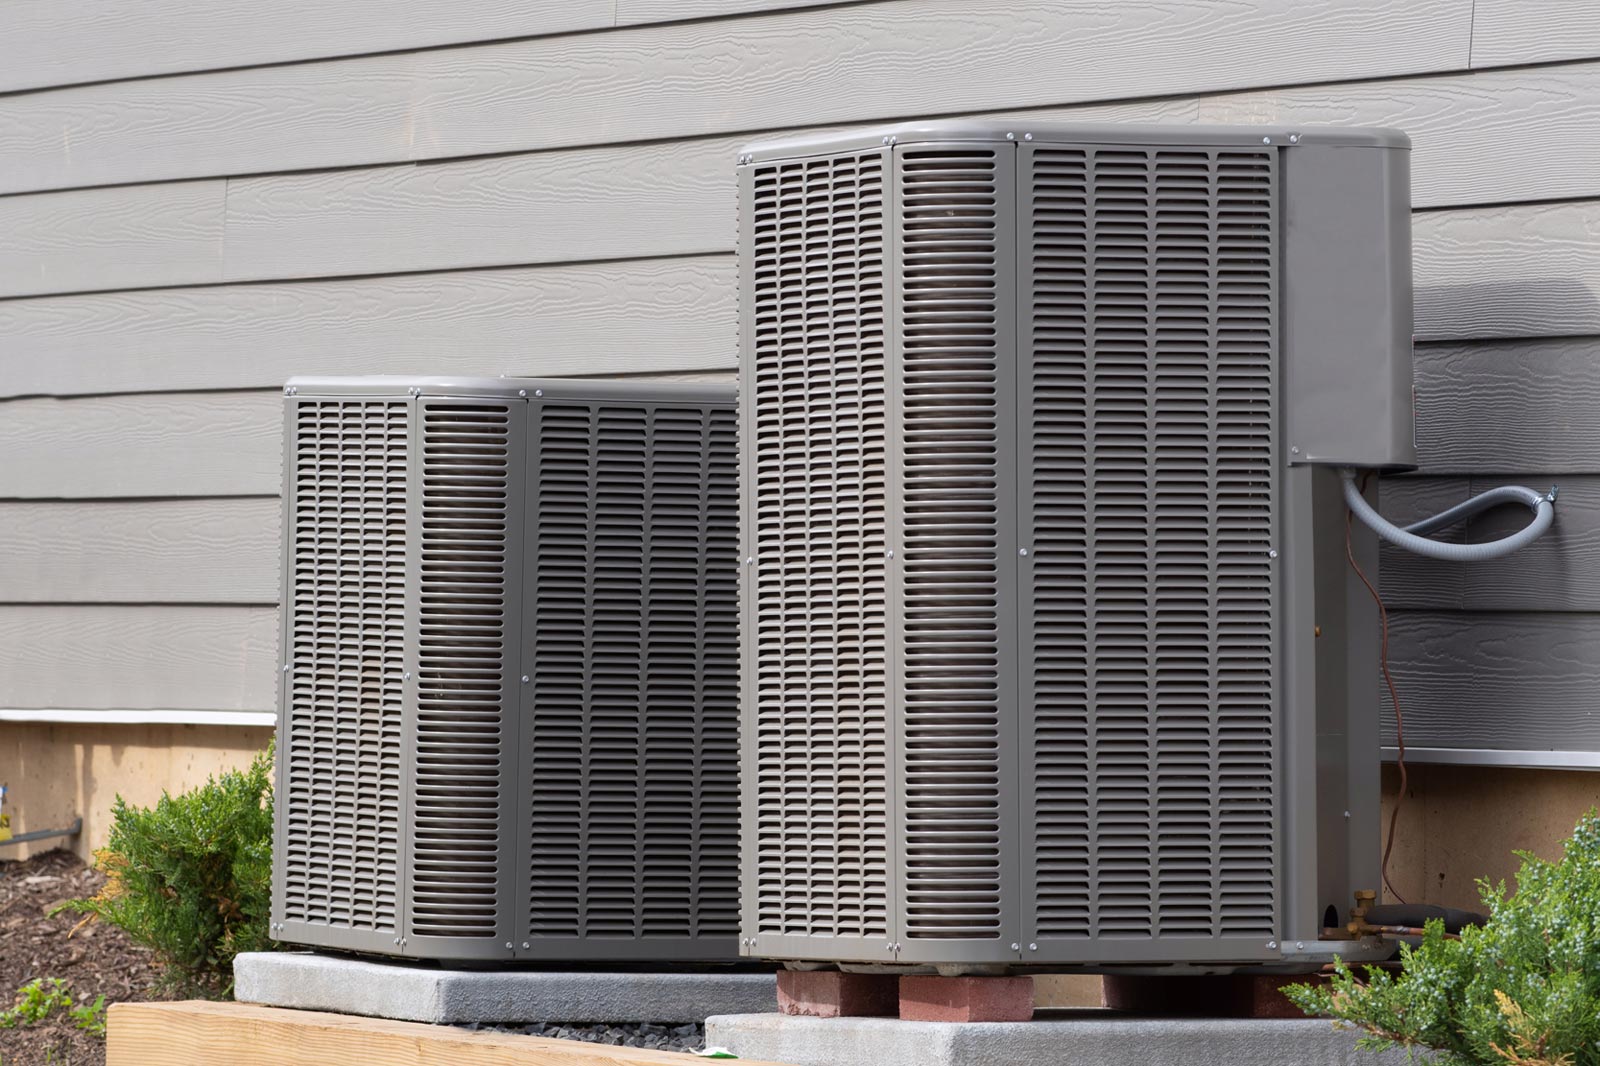 HVAC Replacement Tips to Consider Before Your Replace Your System